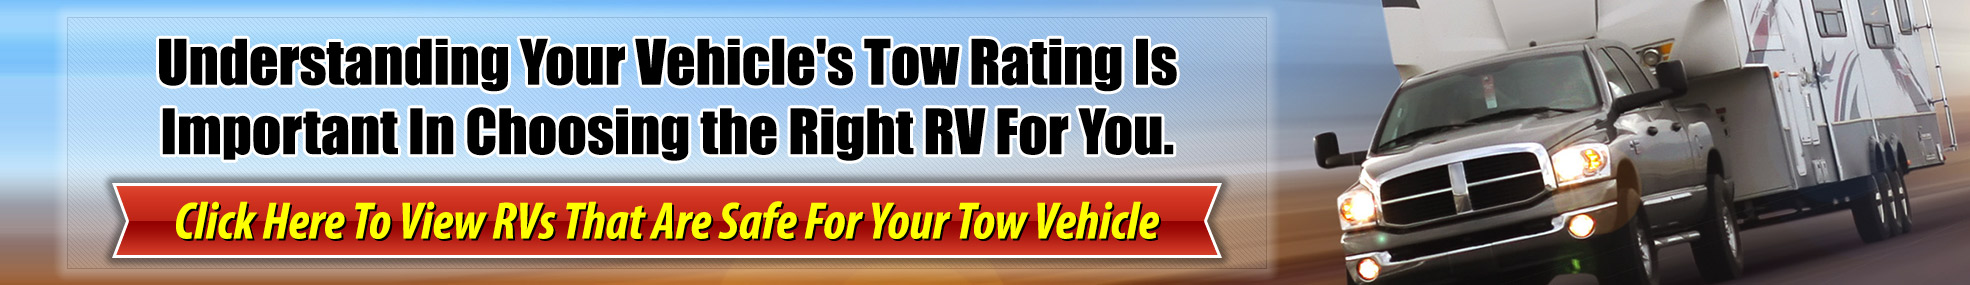 Vehicle Tow Rating Wilkins RV Tow Guide